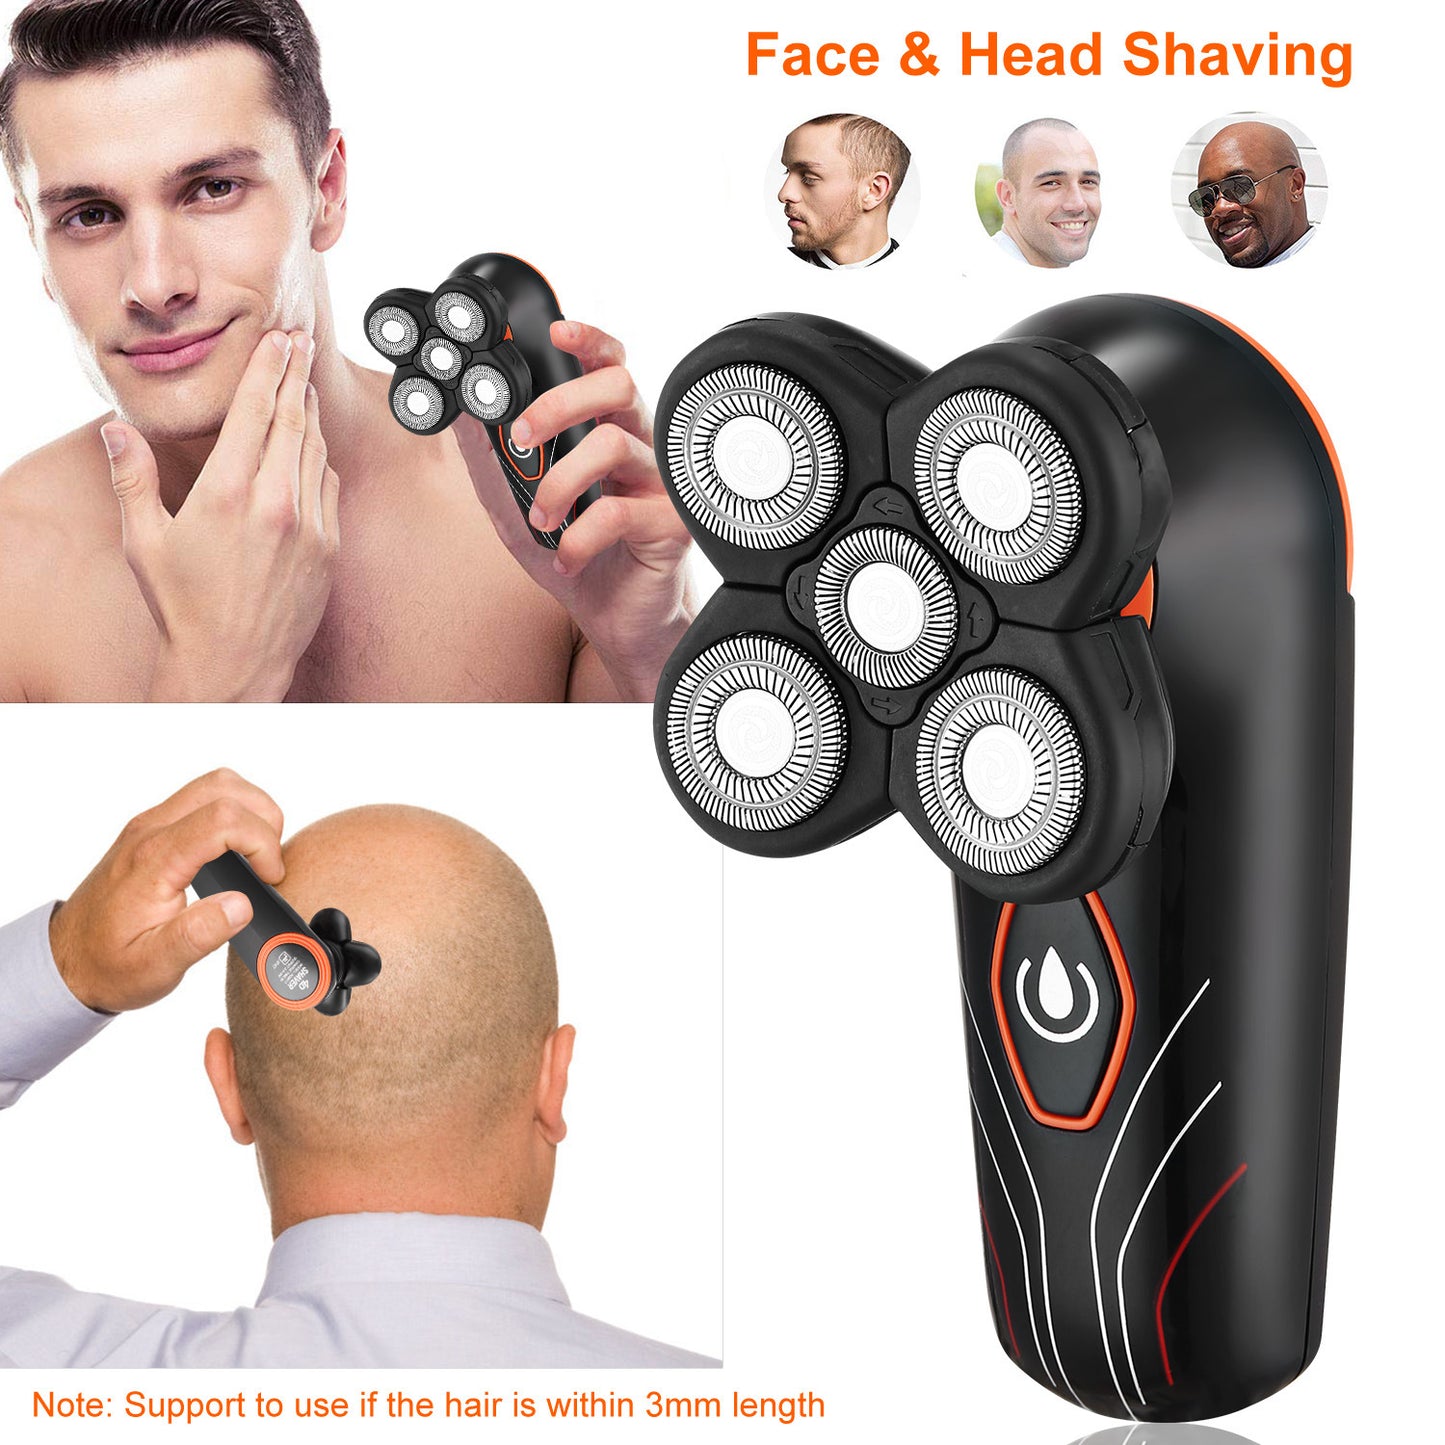 4D Electric Shavers Razor IPX7 Waterproof Wet & Dry 5 Floating Head Rotary Shavers Rechargeable Beard Trimmer